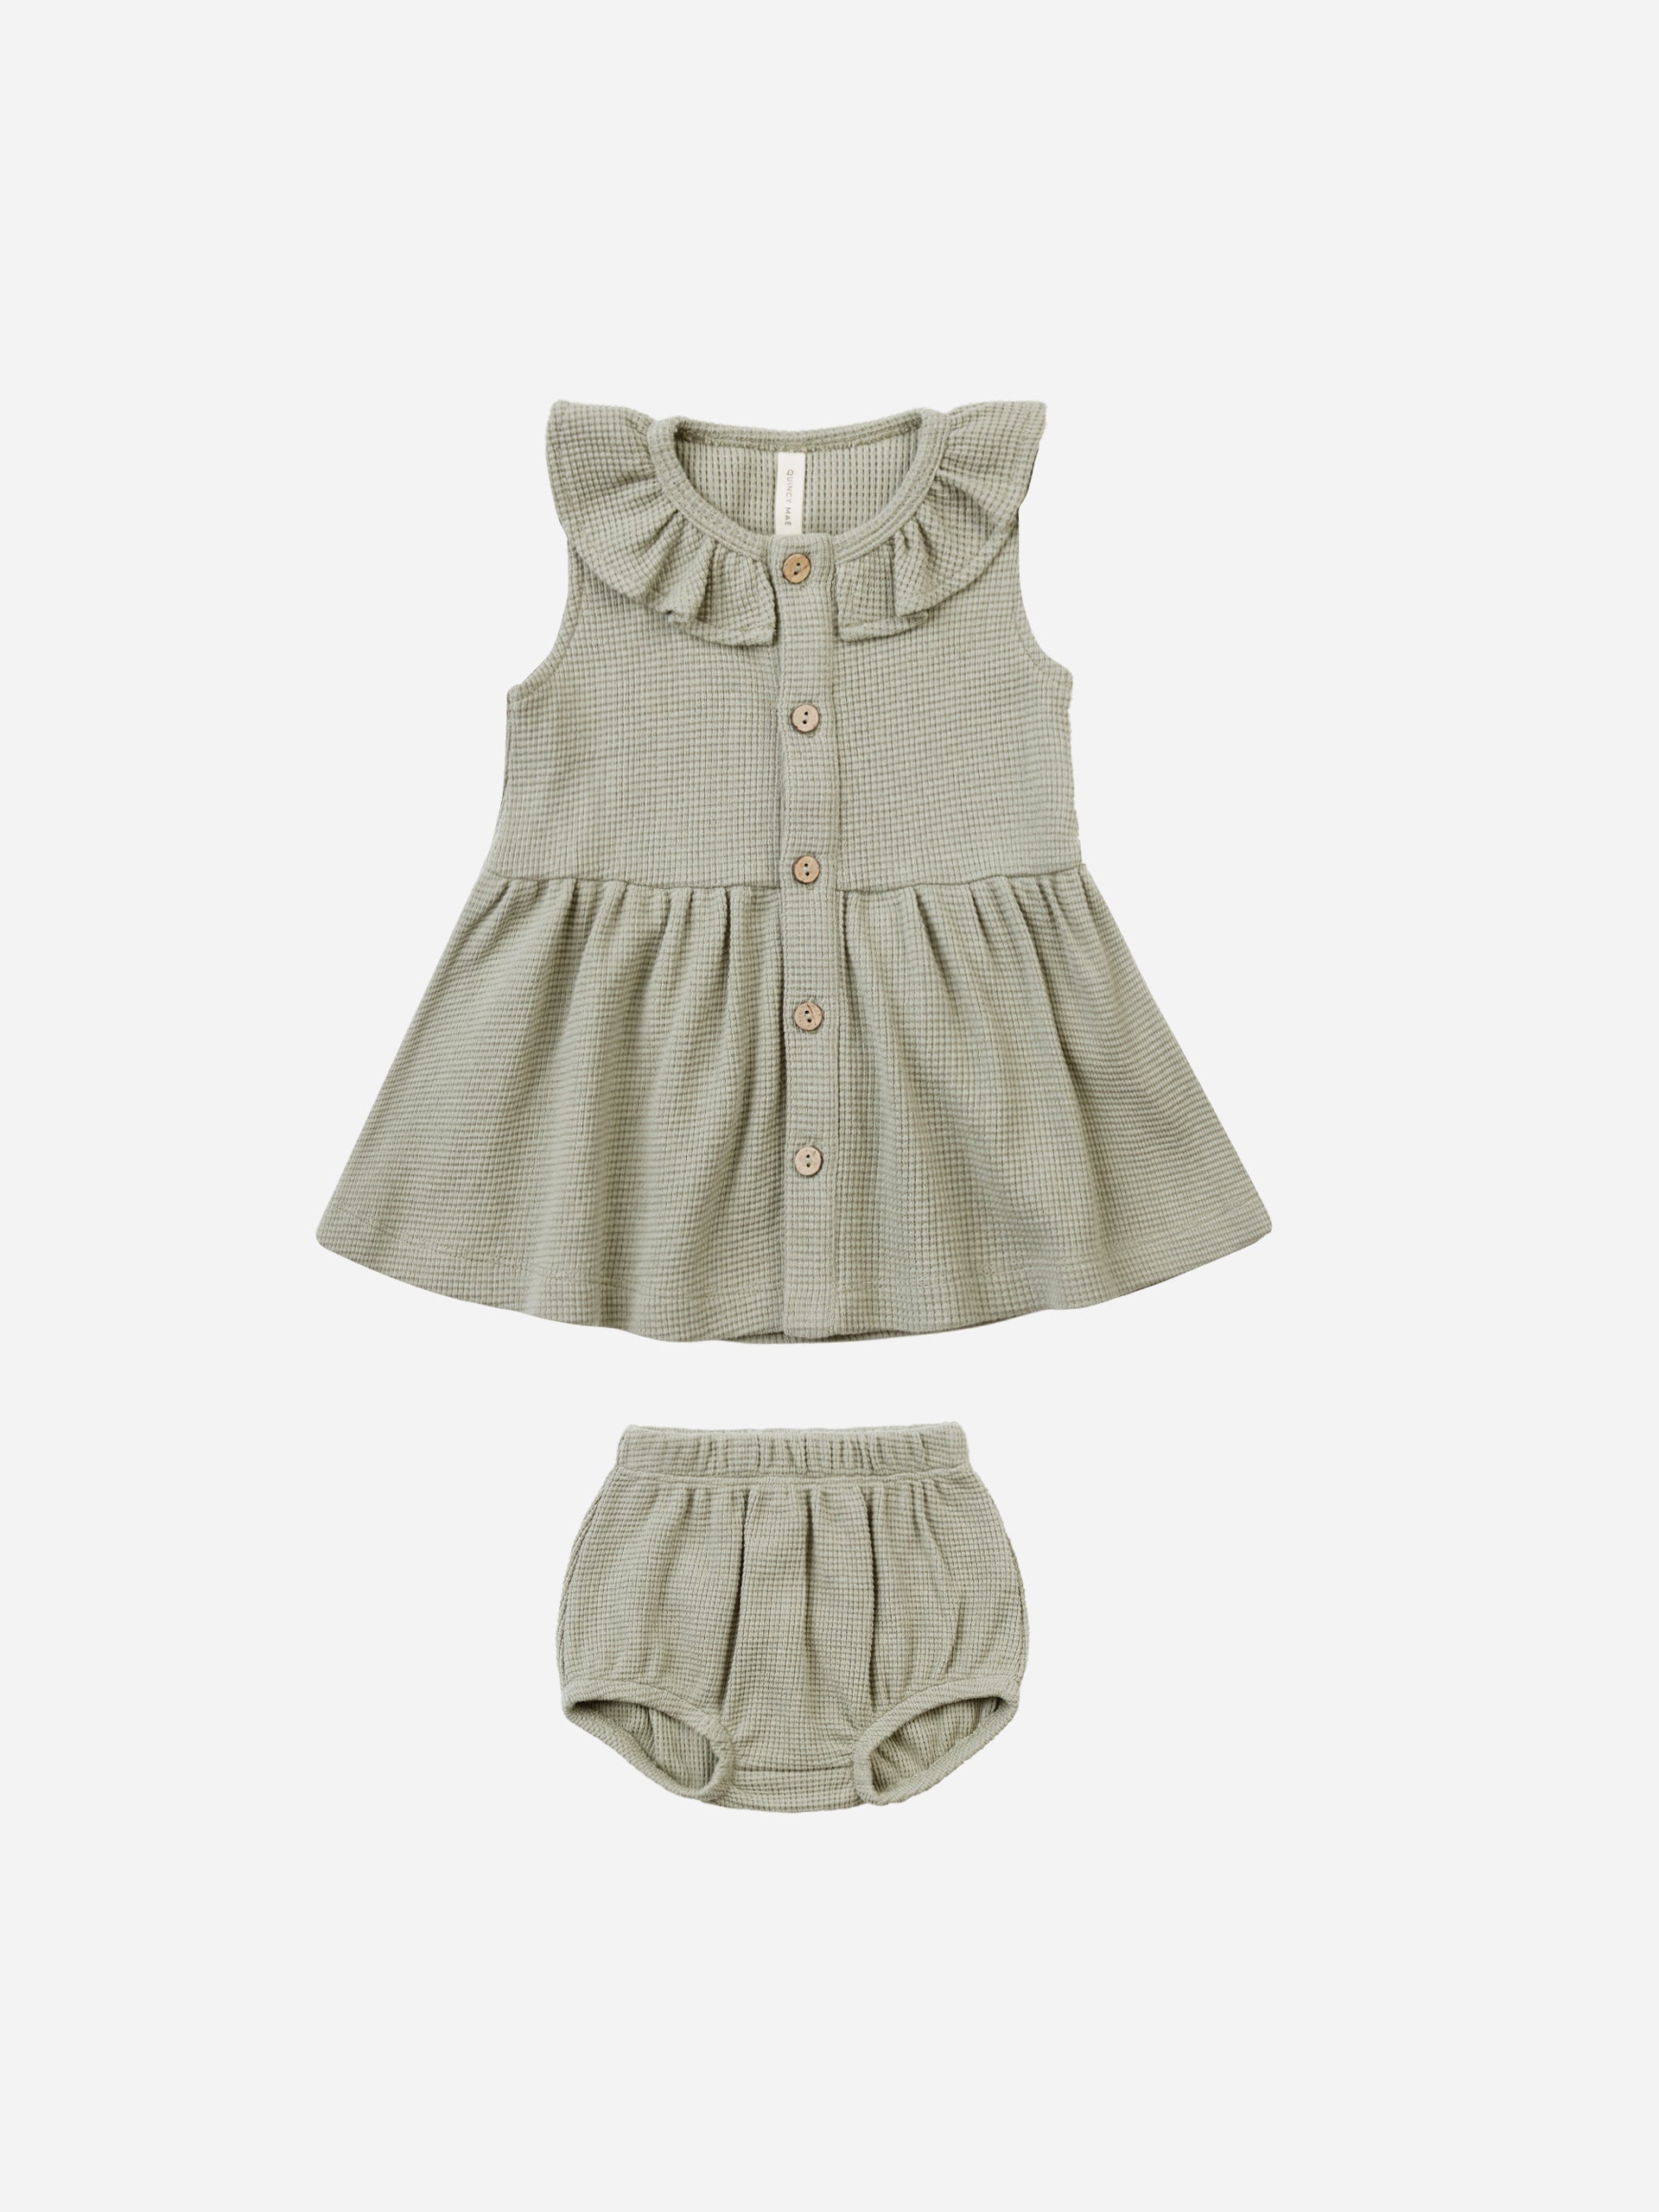 Rue Tank Dress || Sage - Rylee + Cru | Kids Clothes | Trendy Baby Clothes | Modern Infant Outfits |